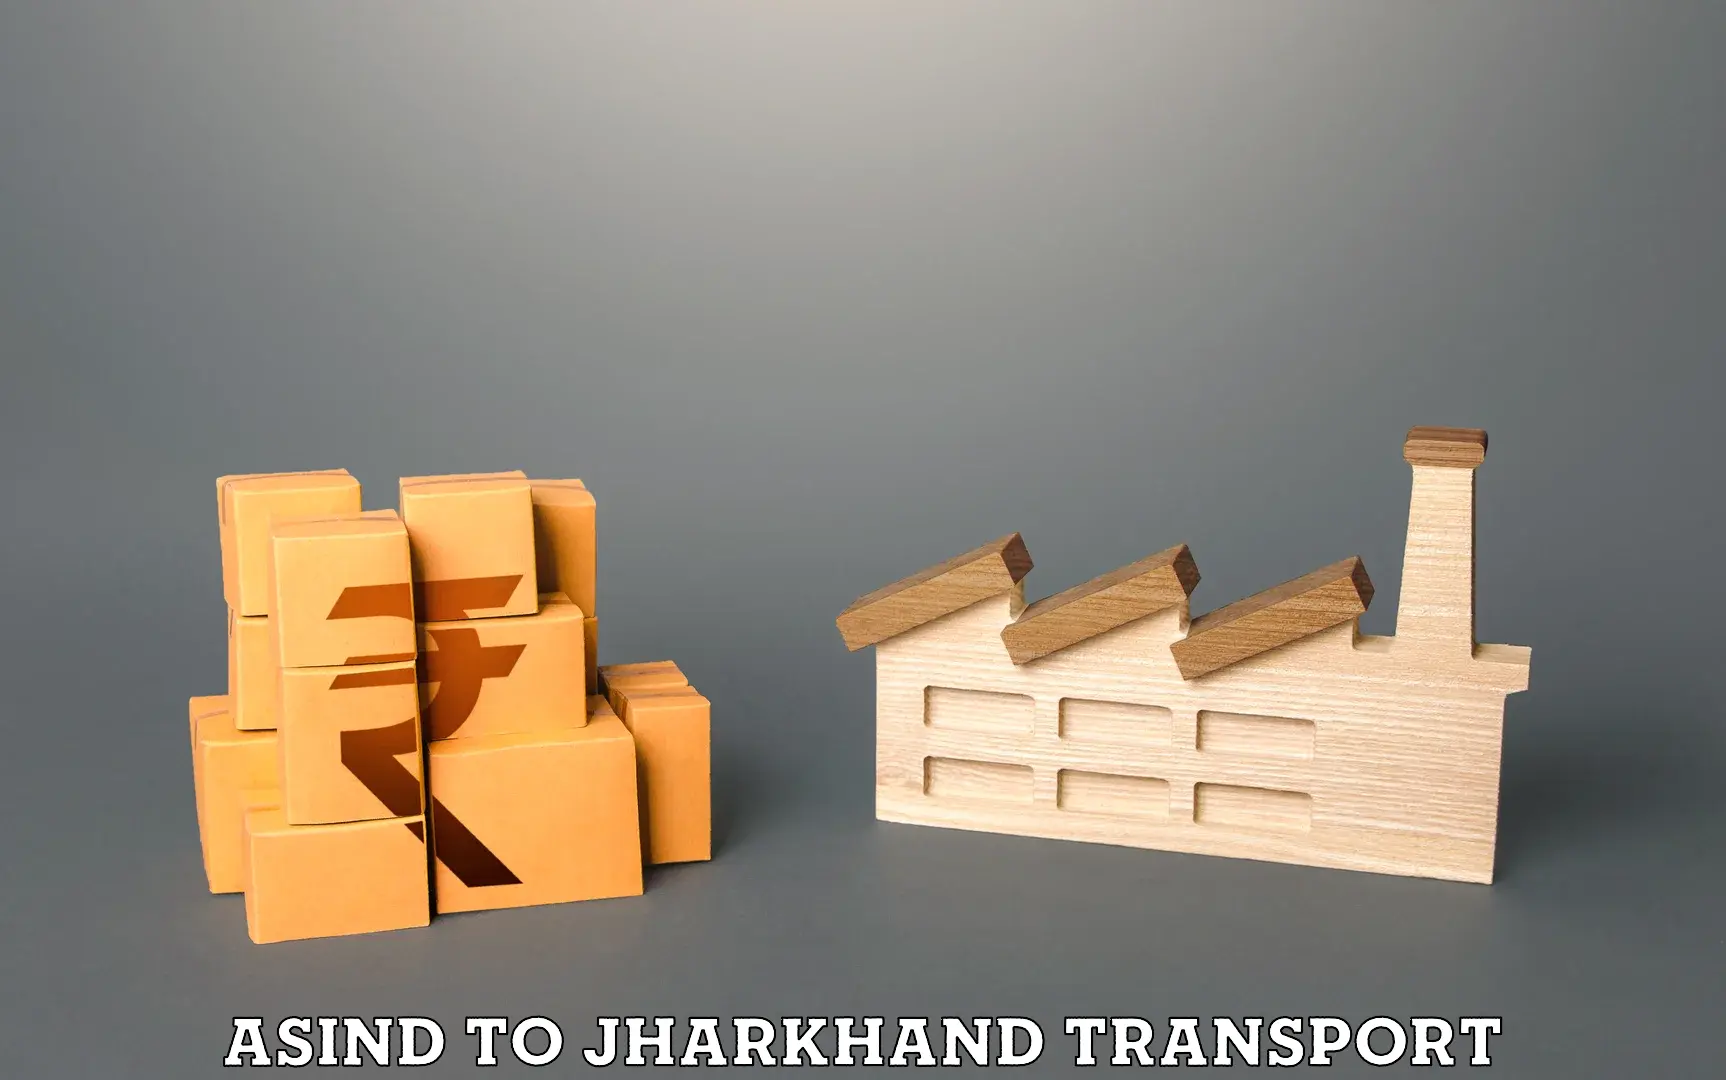 Container transport service Asind to Jamshedpur